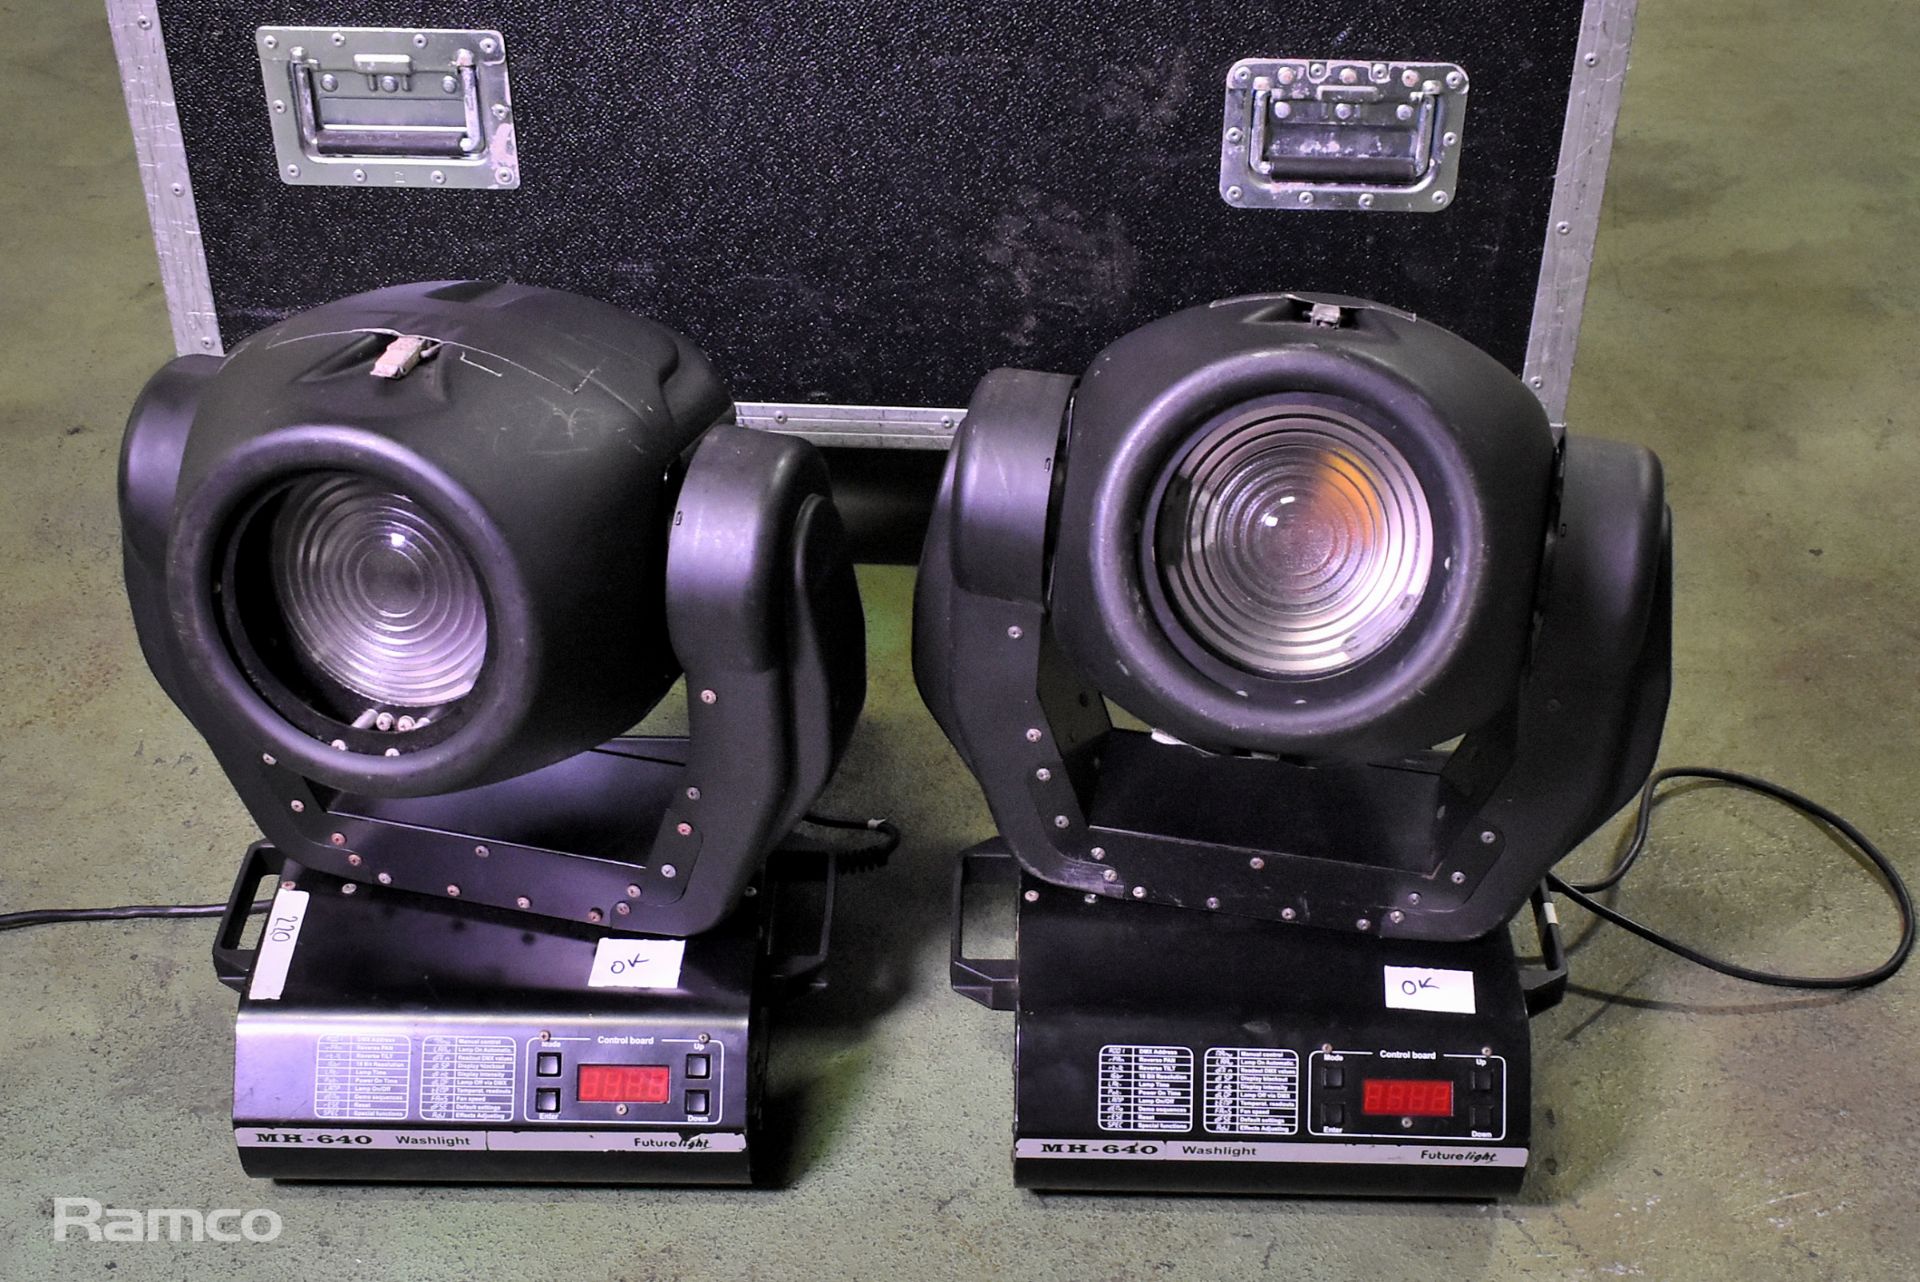 Two moving heads 640 Future light in flight case - L 1100 x W 460 x H 900mm